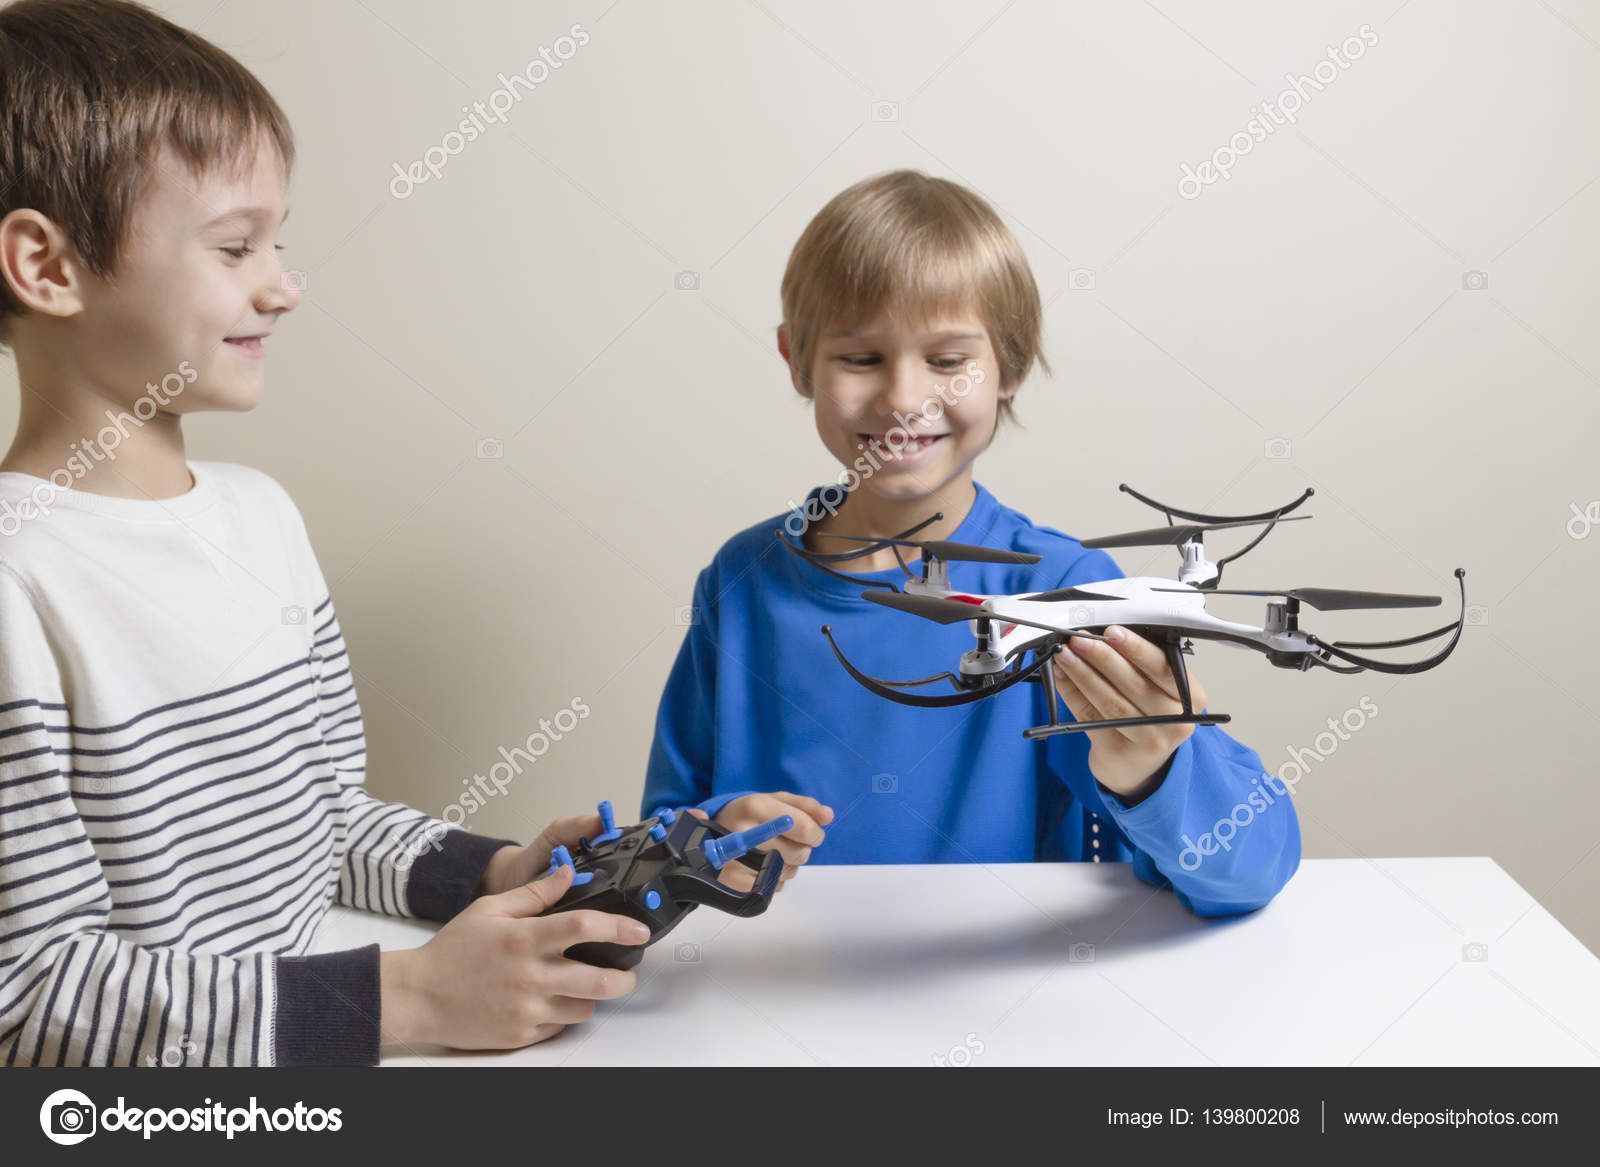 depositphotos_139800208-stock-photo-happy-kids-with-drone-at.jpg